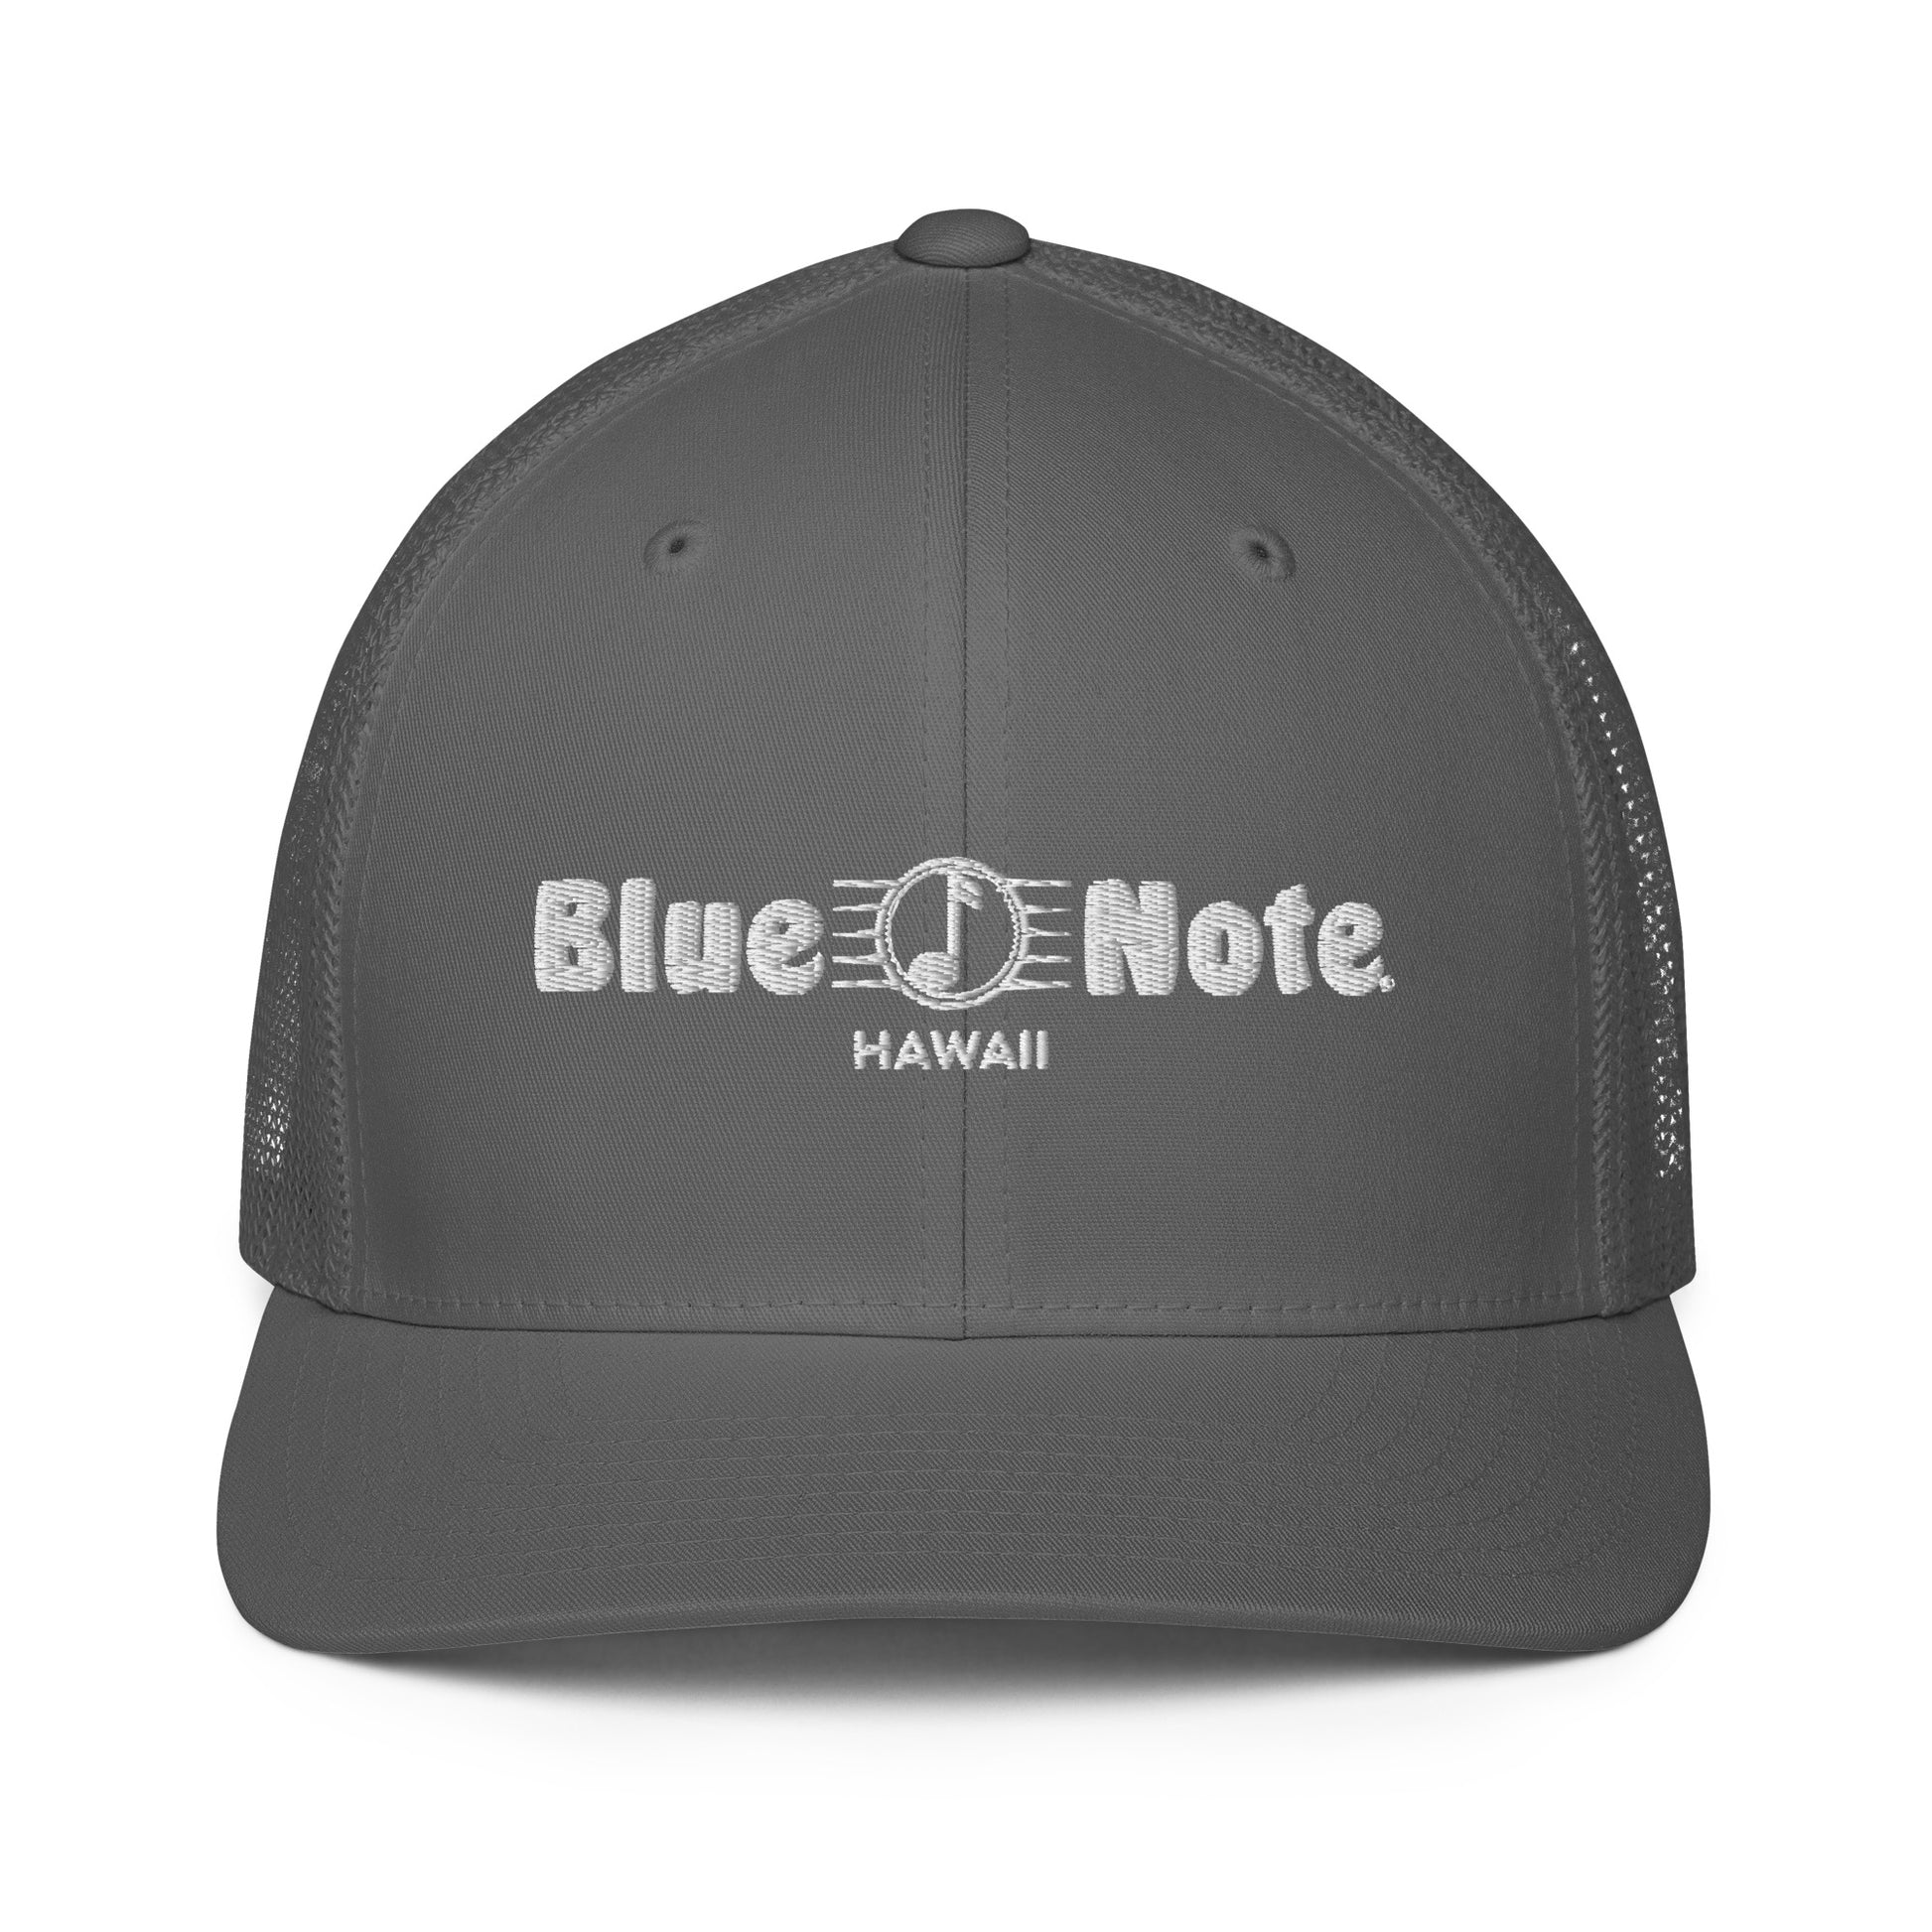 Blue Note Embroidered Trucker Cap